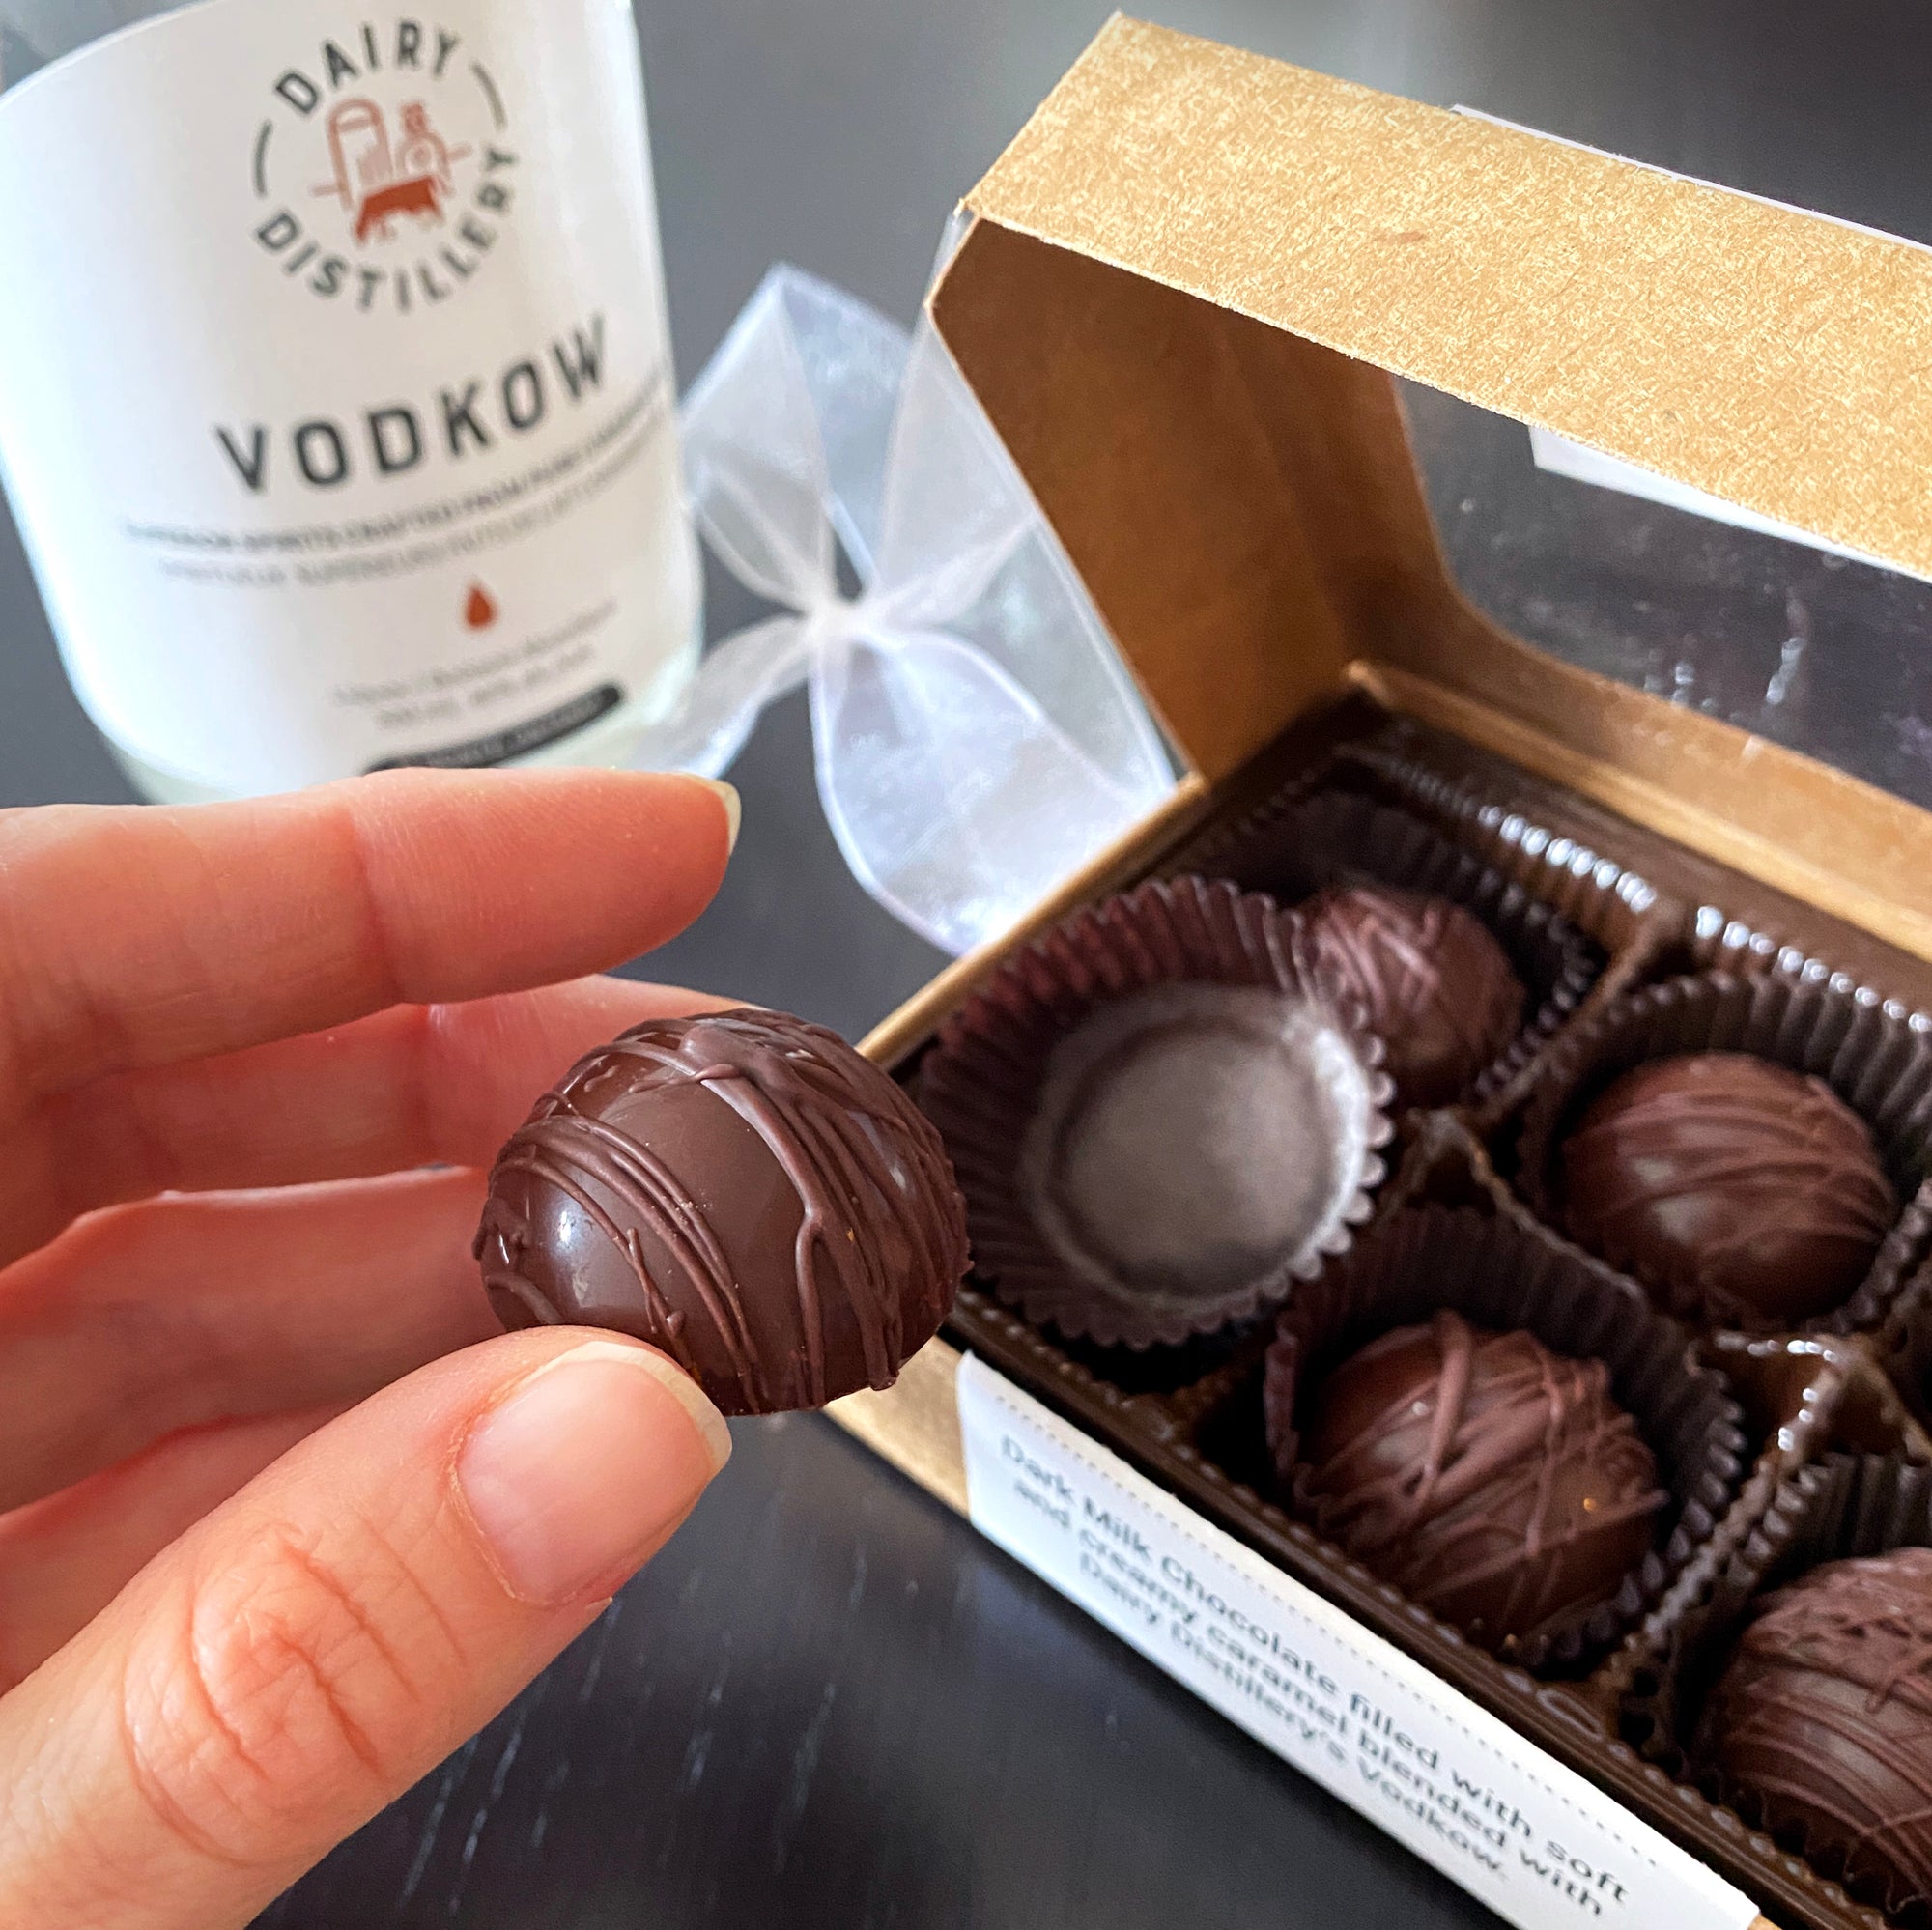 Hummingbird Chocolate, Box of 6 Vodkow Caramels, opened box showcasing the 6 pieces inside, with Dairy Distillery's Vodkow in the background.